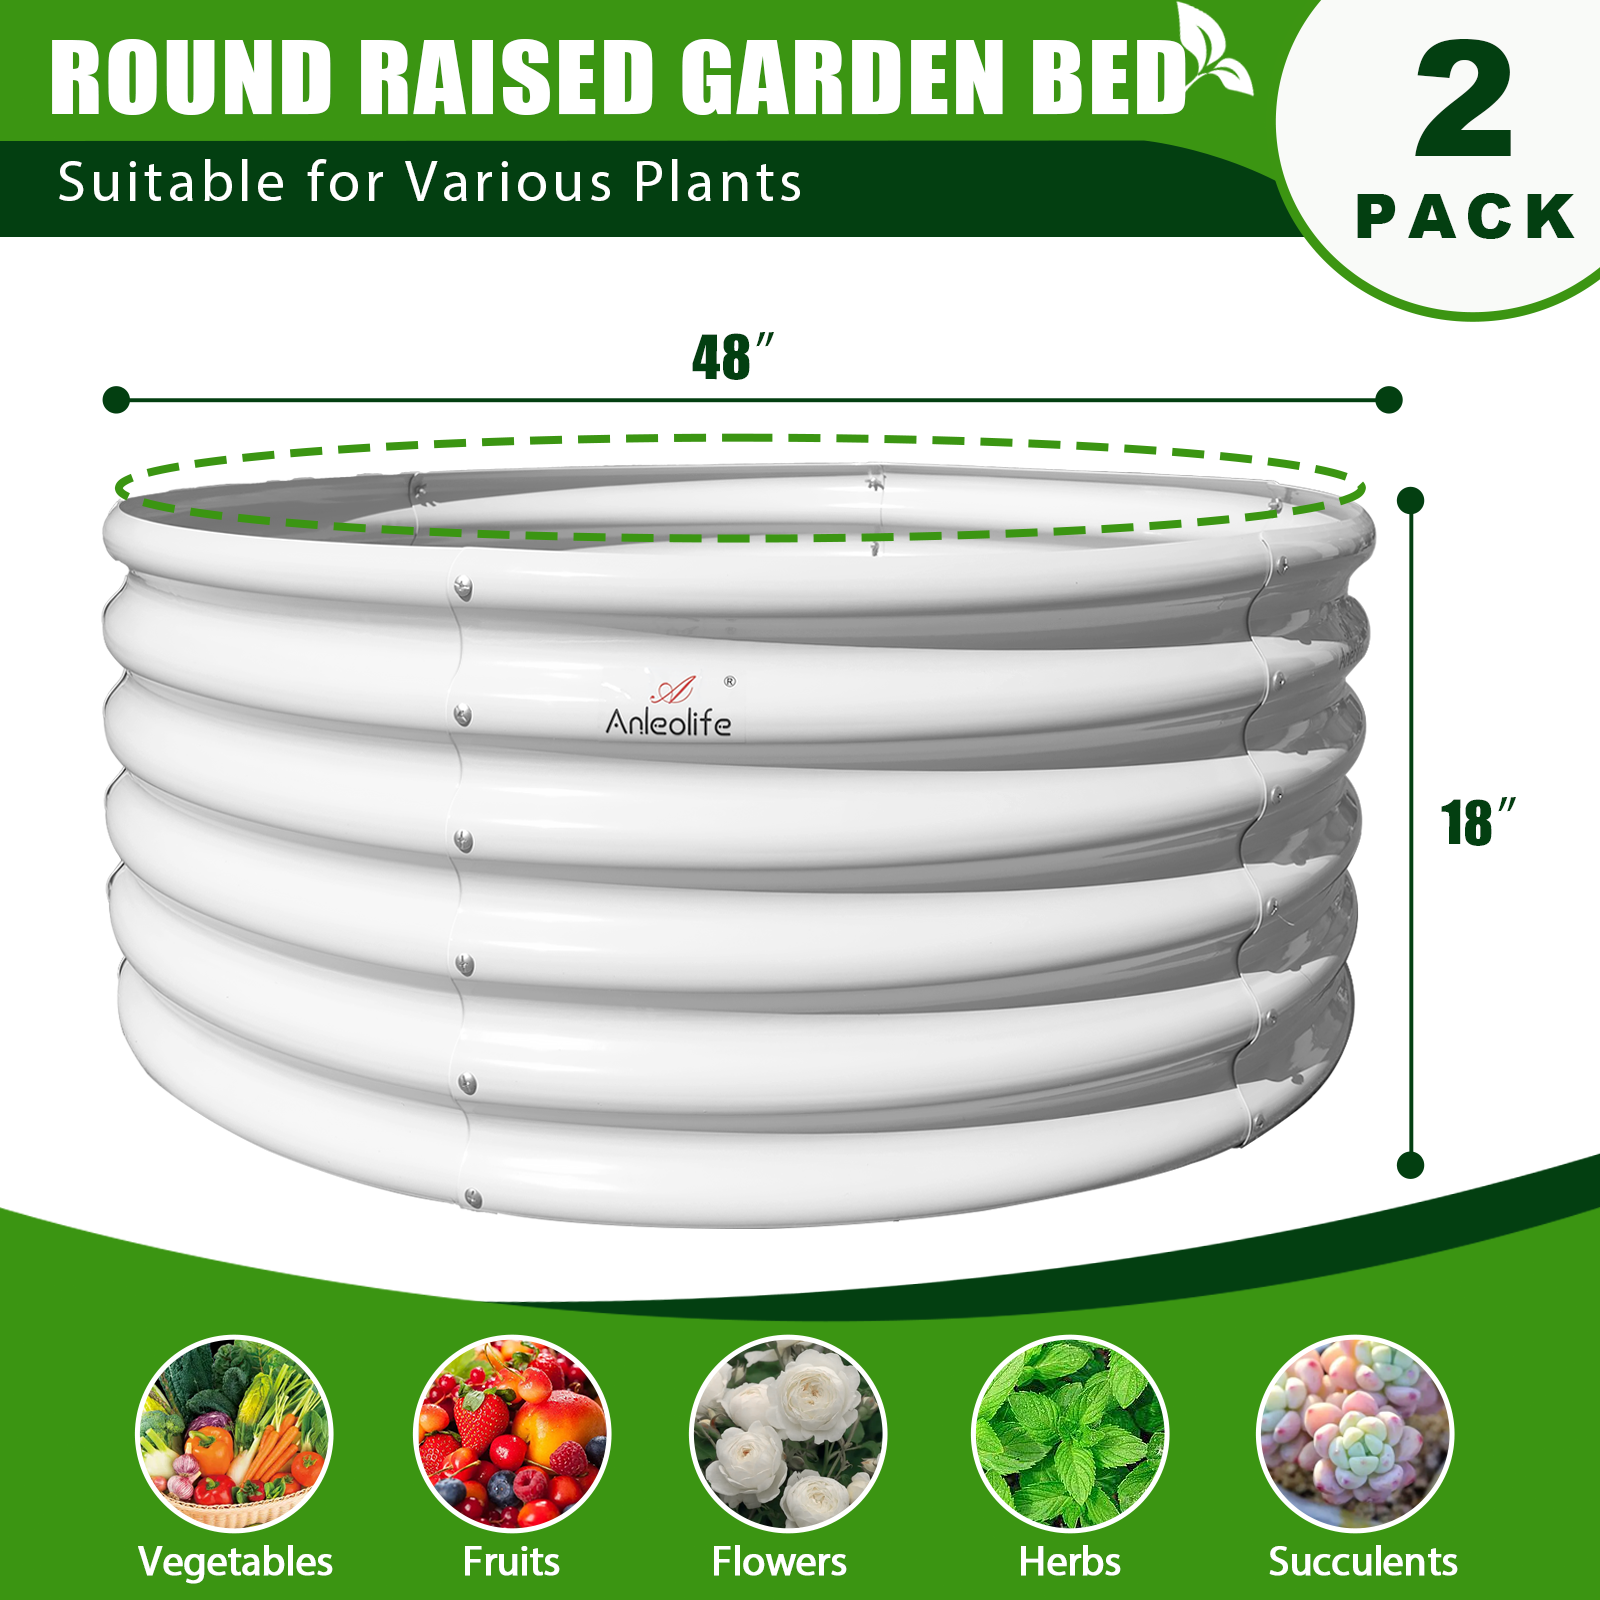 Set of 5: 12x3x1.5ft Oval and 4x1.5ft Round Modular Metal Raised Garden Beds